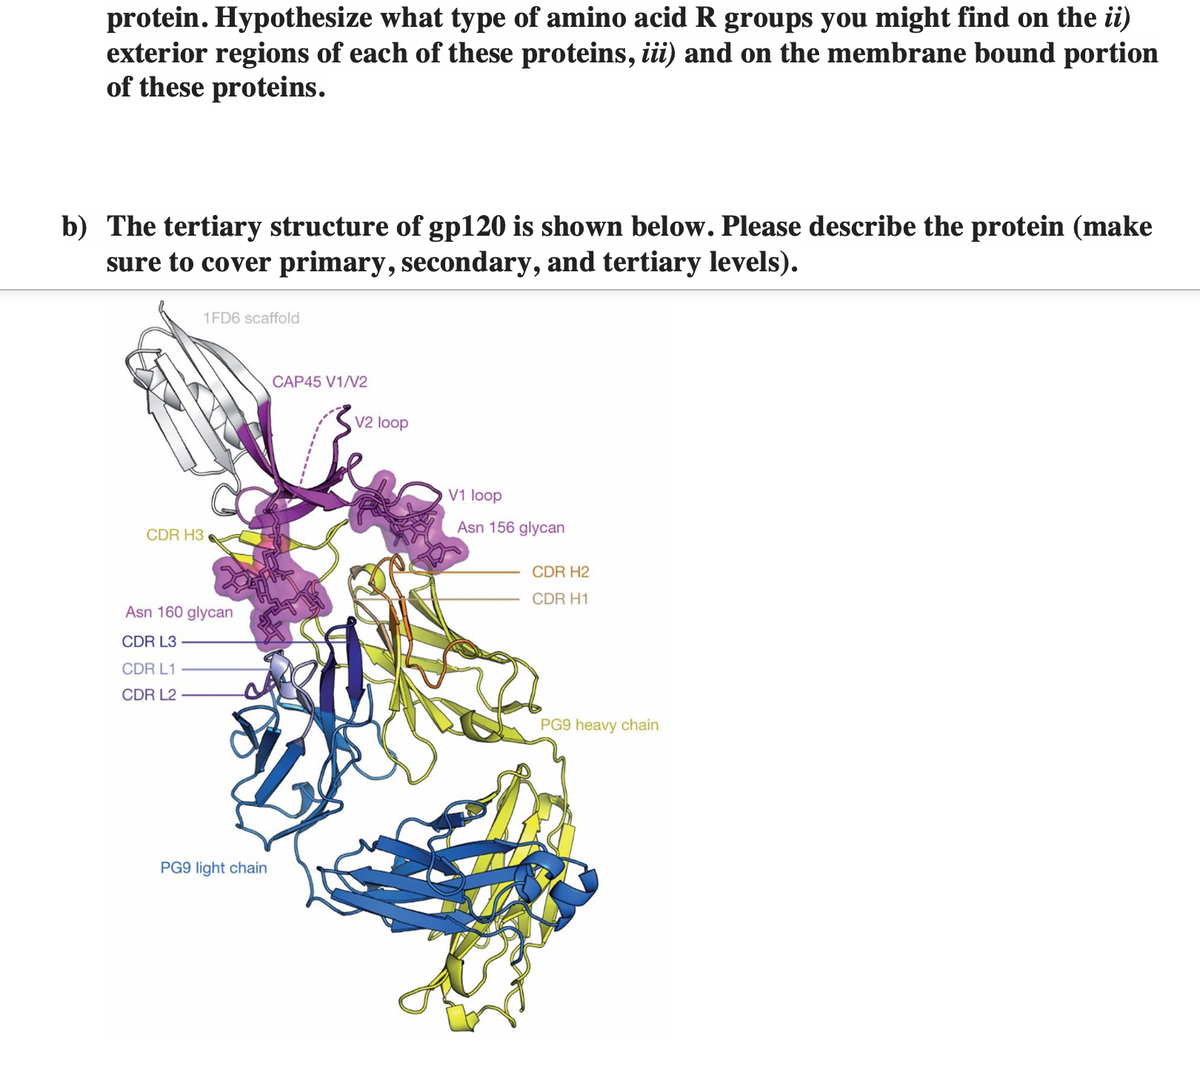 protein. Hypothesize what type of amino acid R groups you might find on the ii)
exterior regions of each of these proteins, iii) and on the membrane bound portion
of these proteins.
b) The tertiary structure of gp120 is shown below. Please describe the protein (make
sure to cover primary, secondary, and tertiary levels).
CDR H3
1FD6 scaffold
Asn 160 glycan
CDR L3
CDR L1
CDR L2
PG9 light chain
CAP45 V1/V2
V2 loop
V1 loop
Asn 156 glycan
CDR H2
CDR H1
PG9 heavy chain